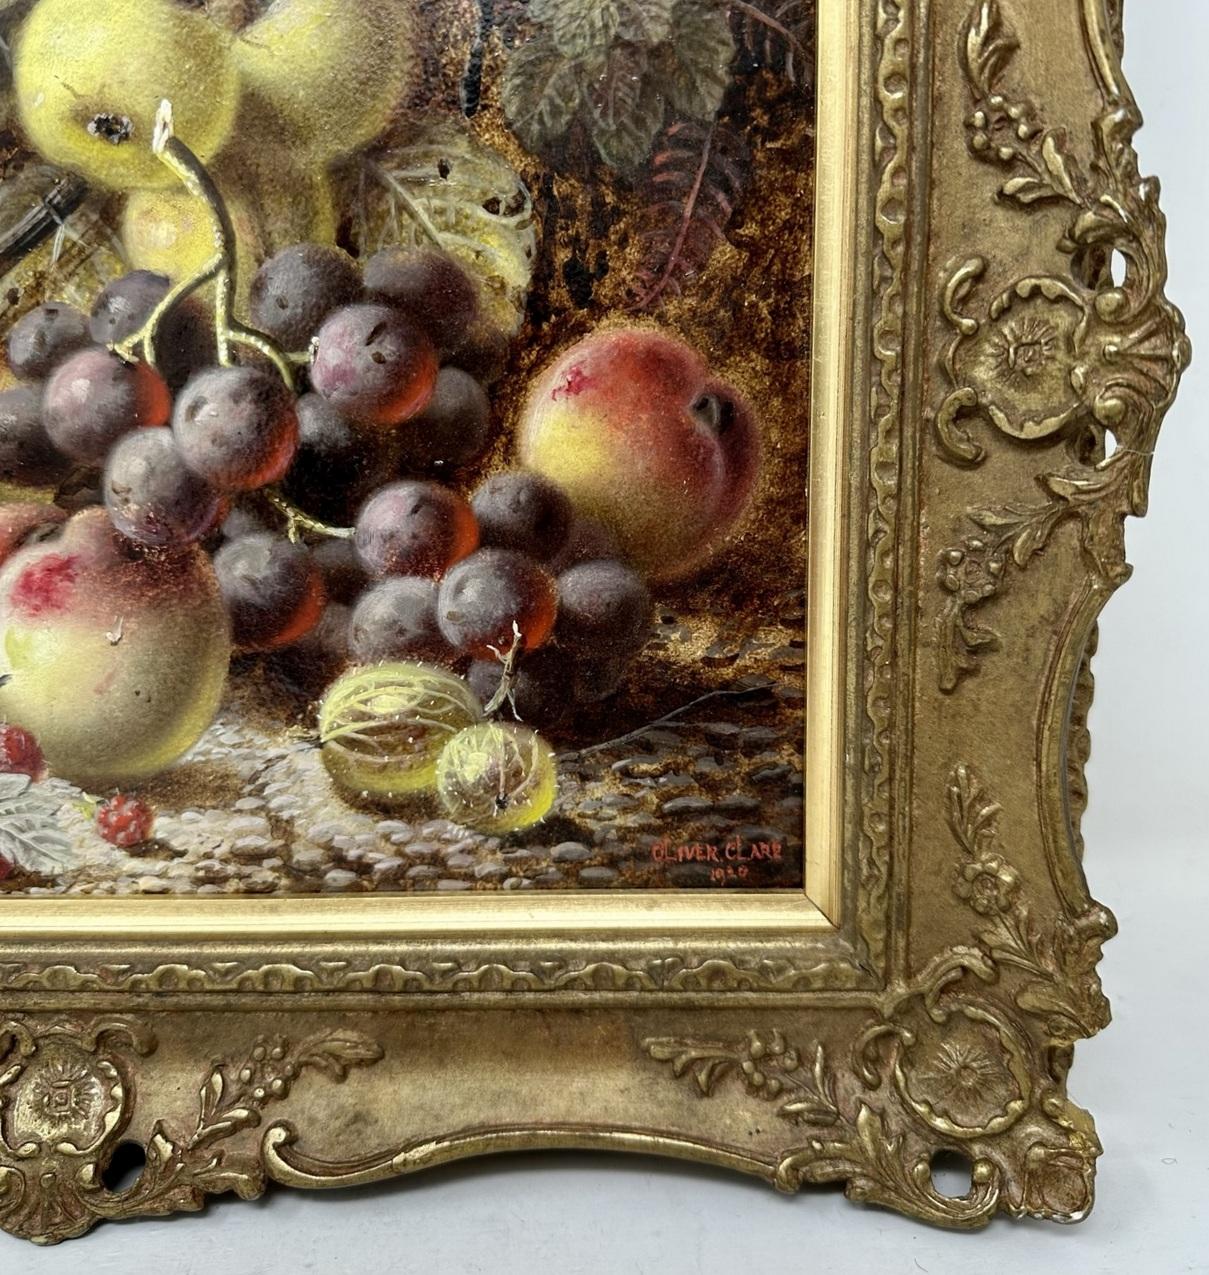 Edwardian Oliver Clare Still Life Fruits Oil on Board English Painting 1920 Gilt Frame For Sale